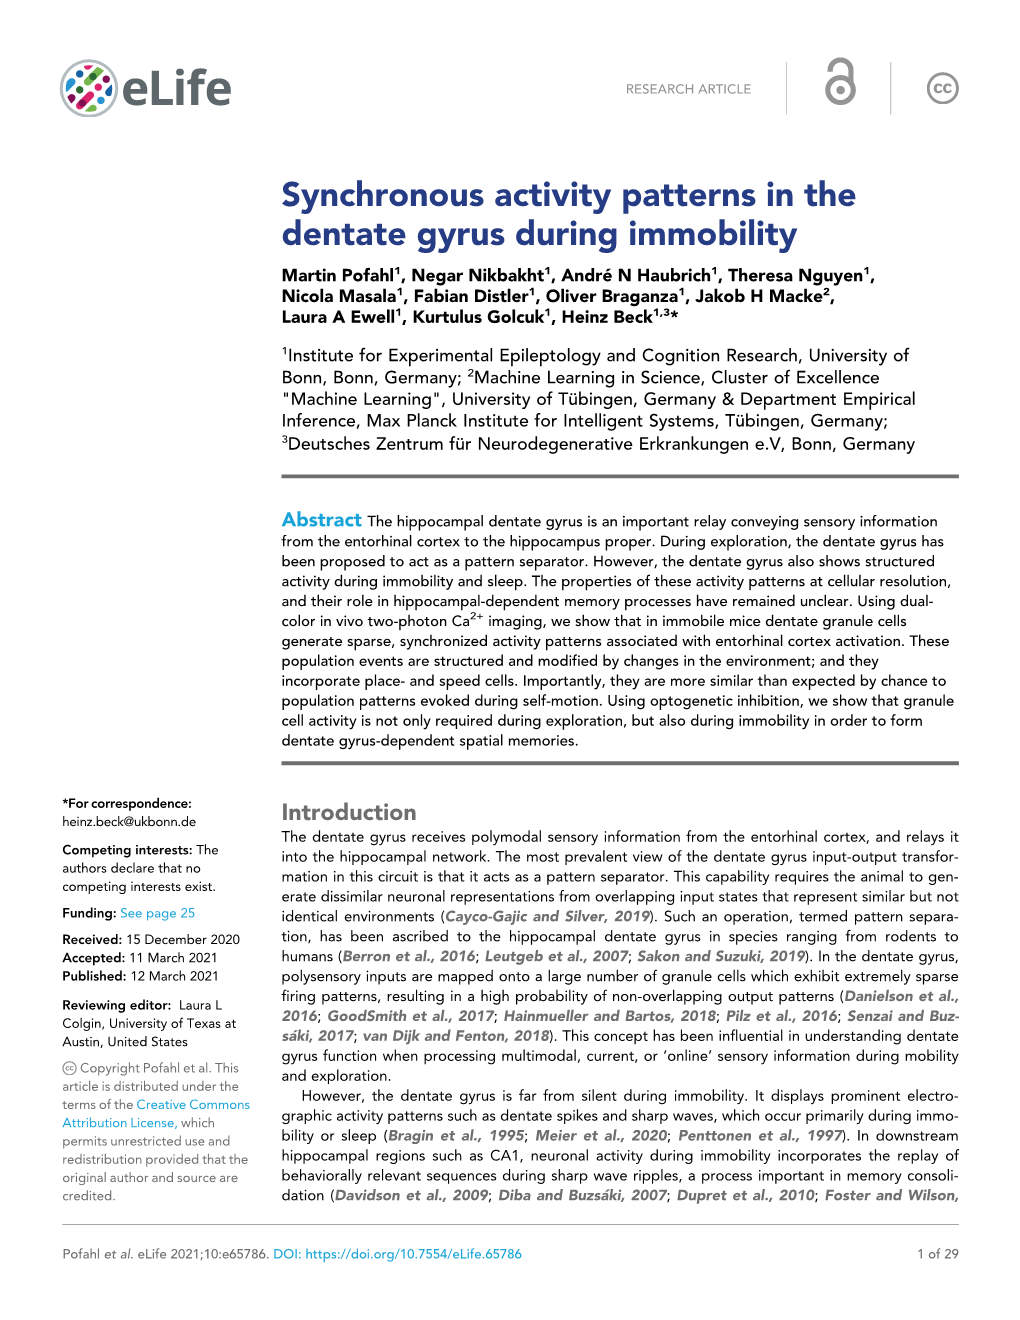 Synchronous Activity Patterns in the Dentate Gyrus During Immobility